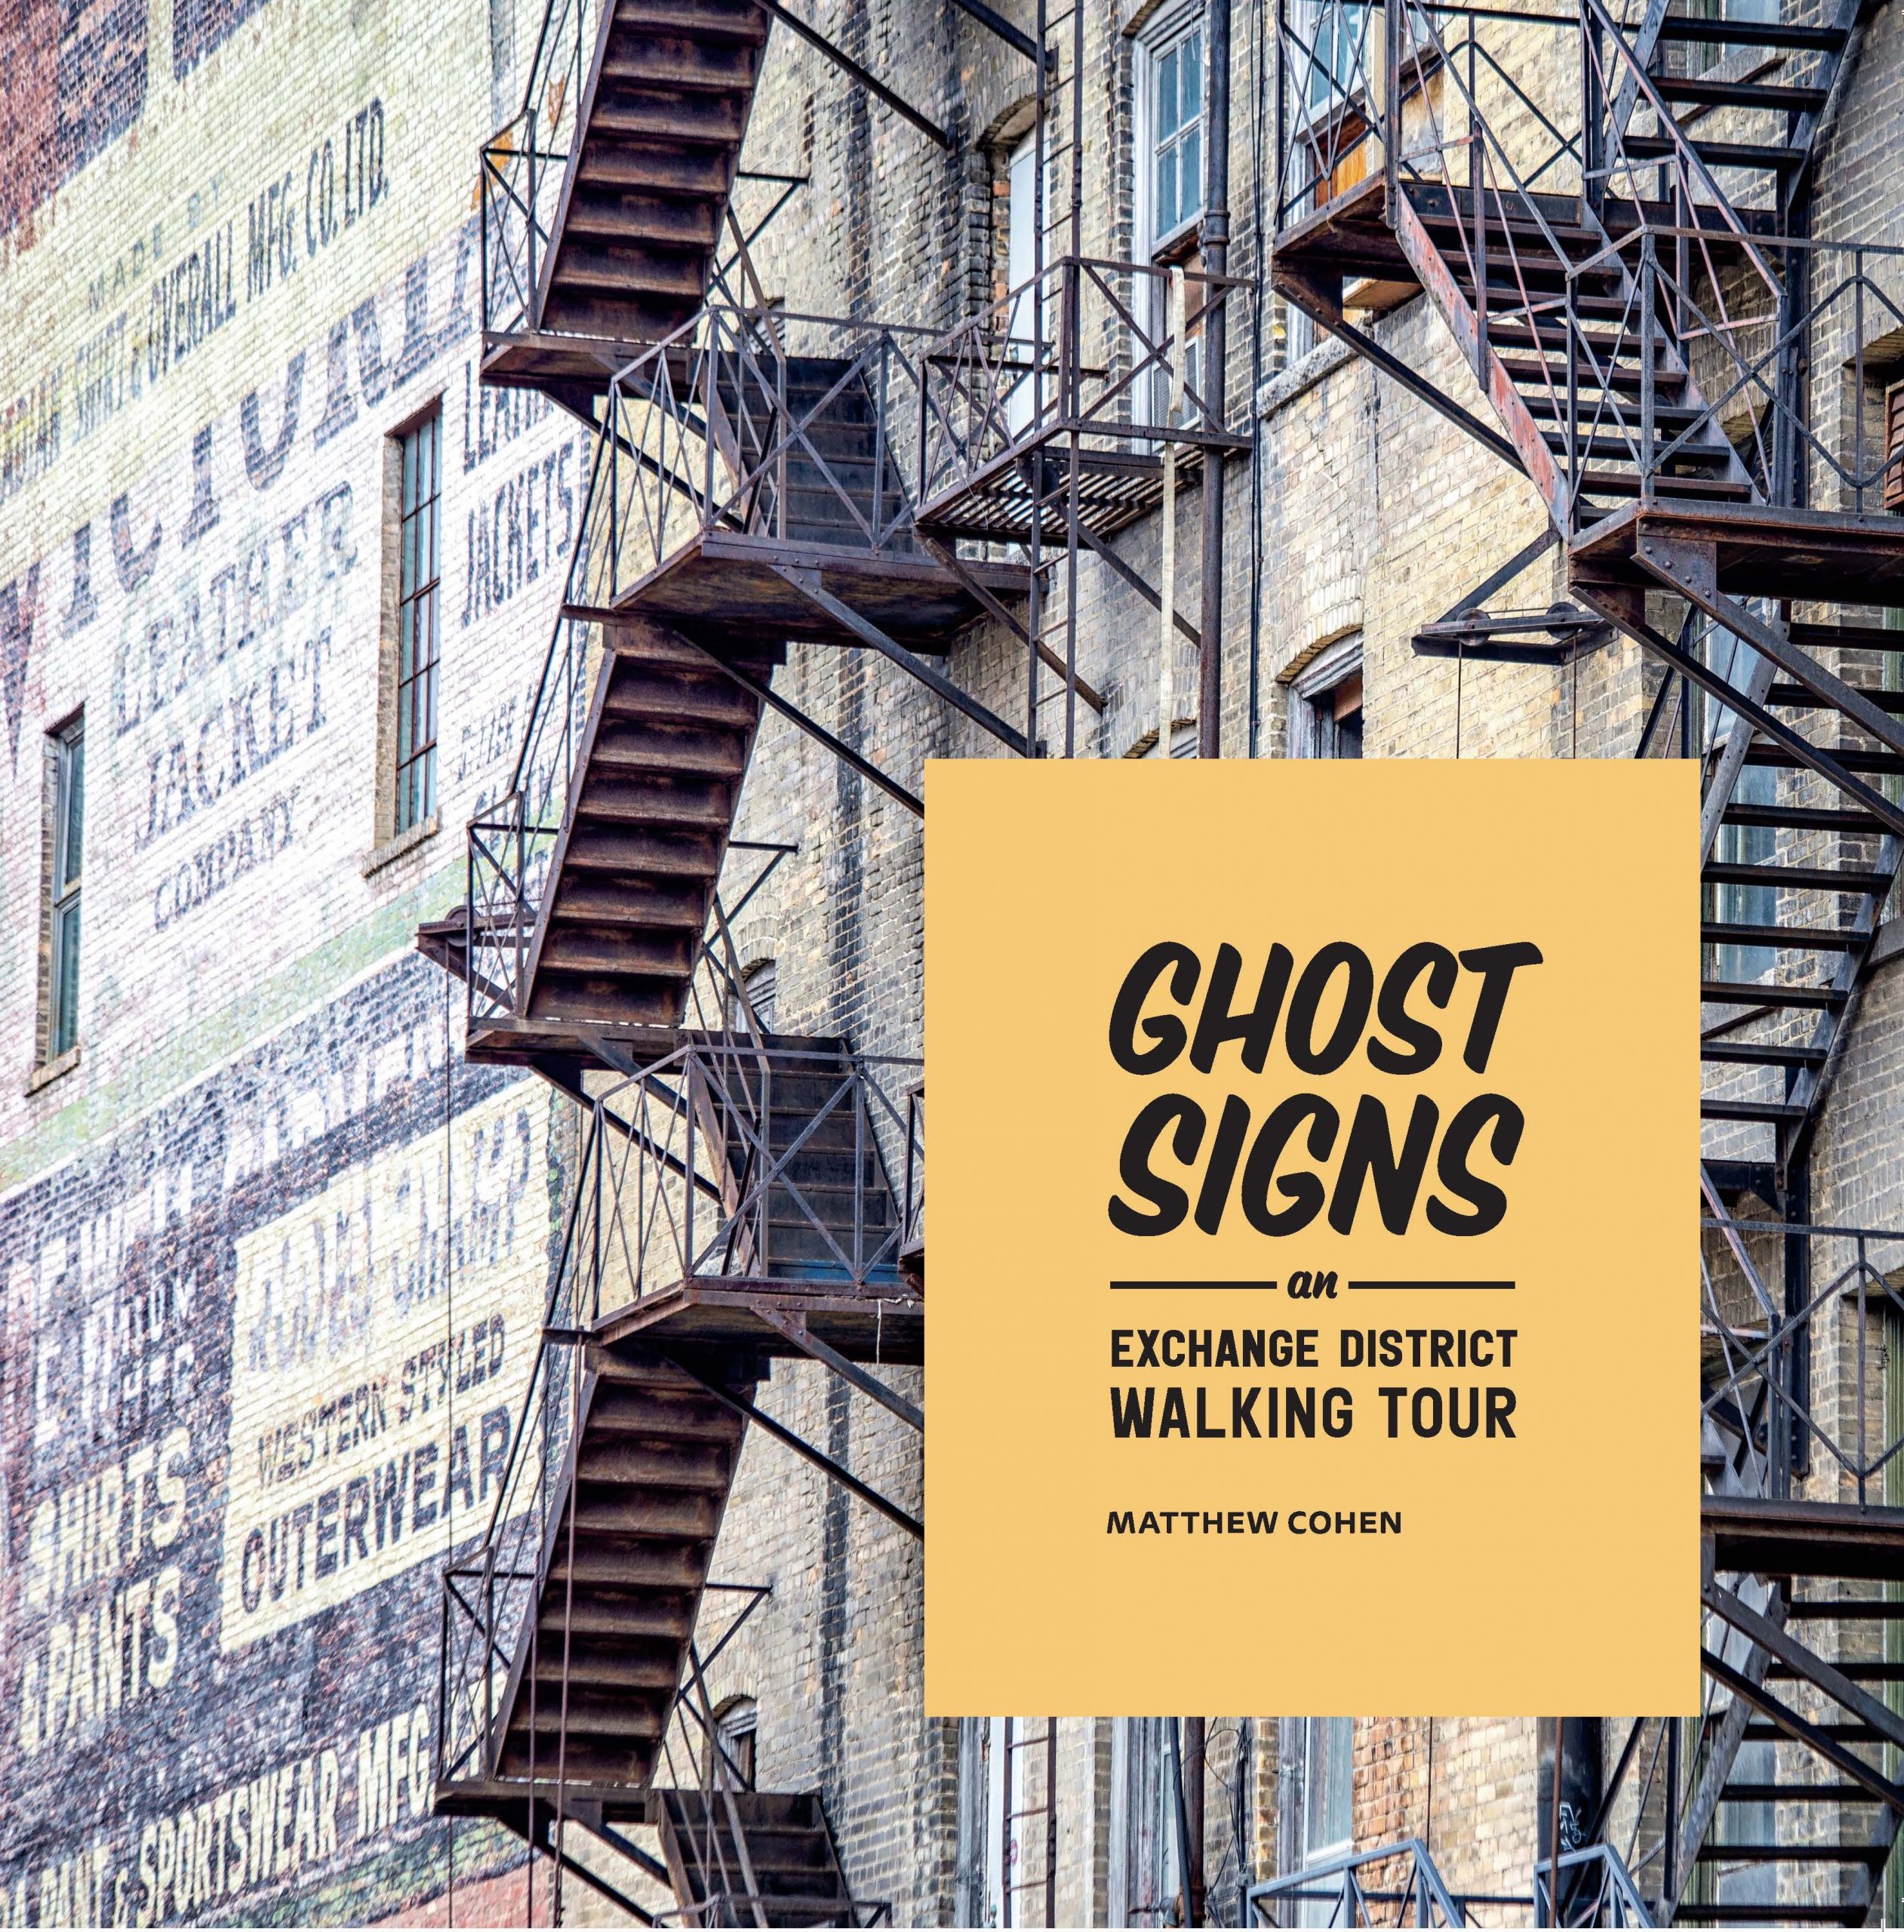 Ghost Signs, an Exchange District walking tour